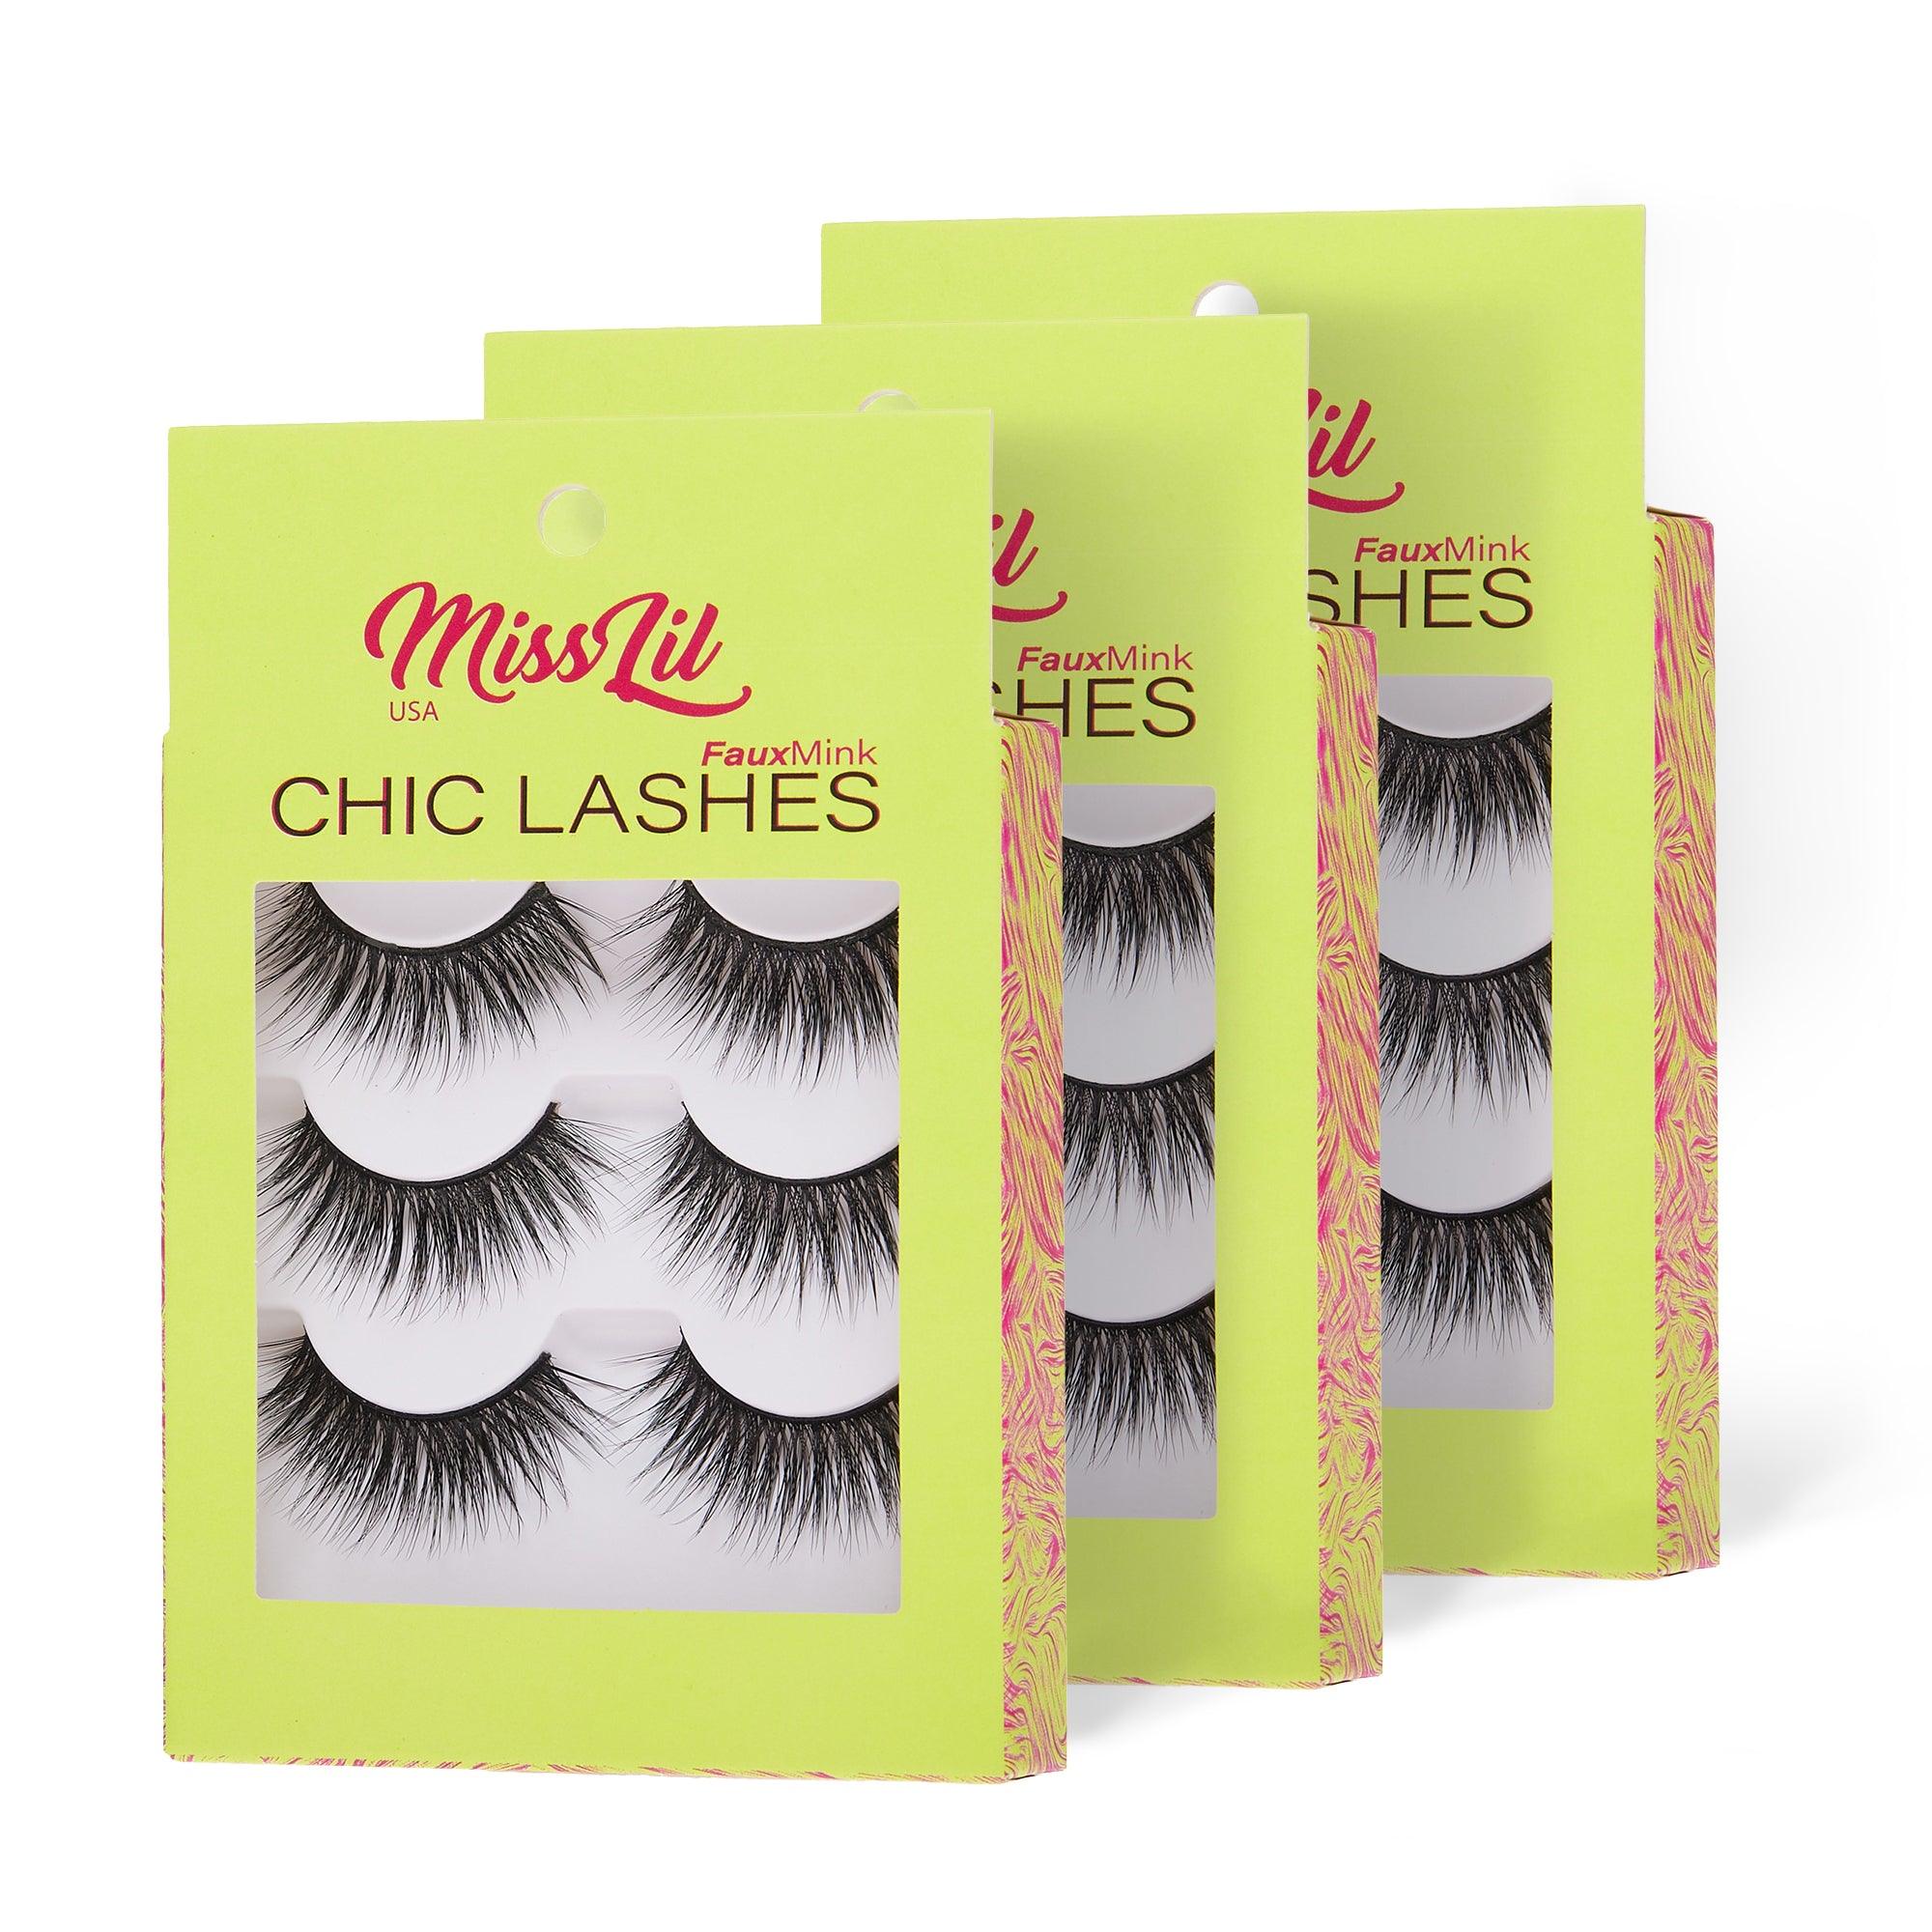 3-Pair Faux Mink Eyelashes - Chic Lashes Collection #9 - Pack of 3 - Miss Lil USA